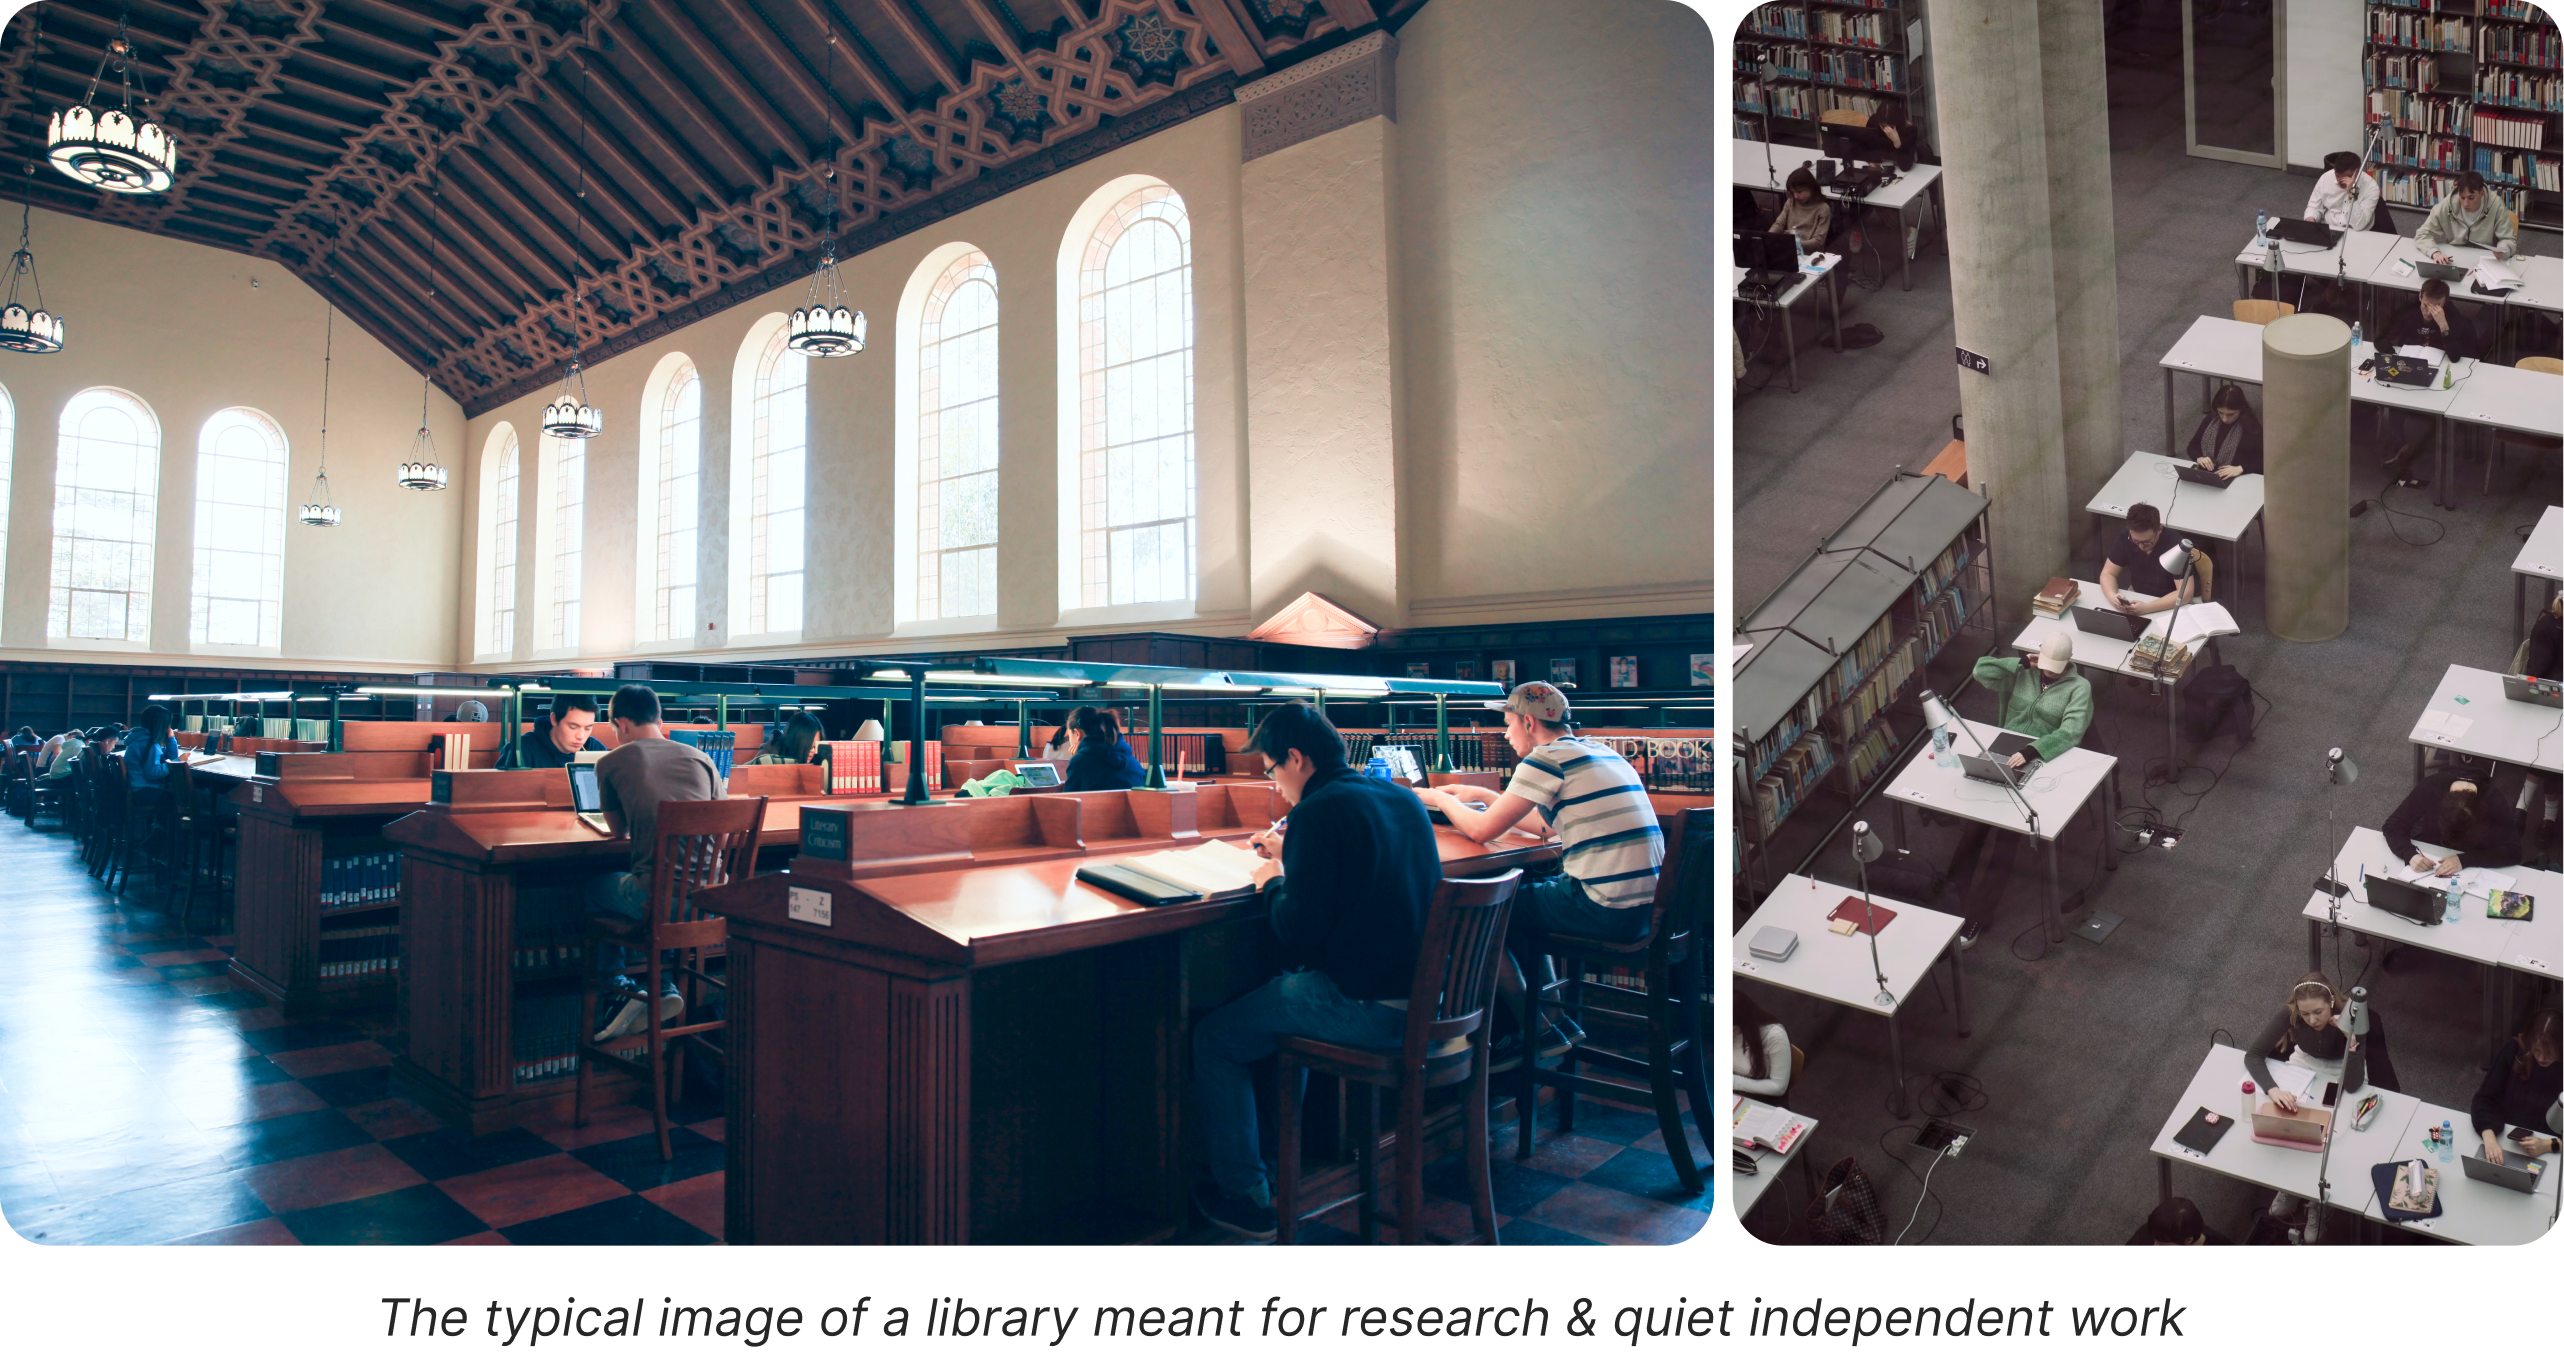 Typical image of a library meant for research & quiet independent work